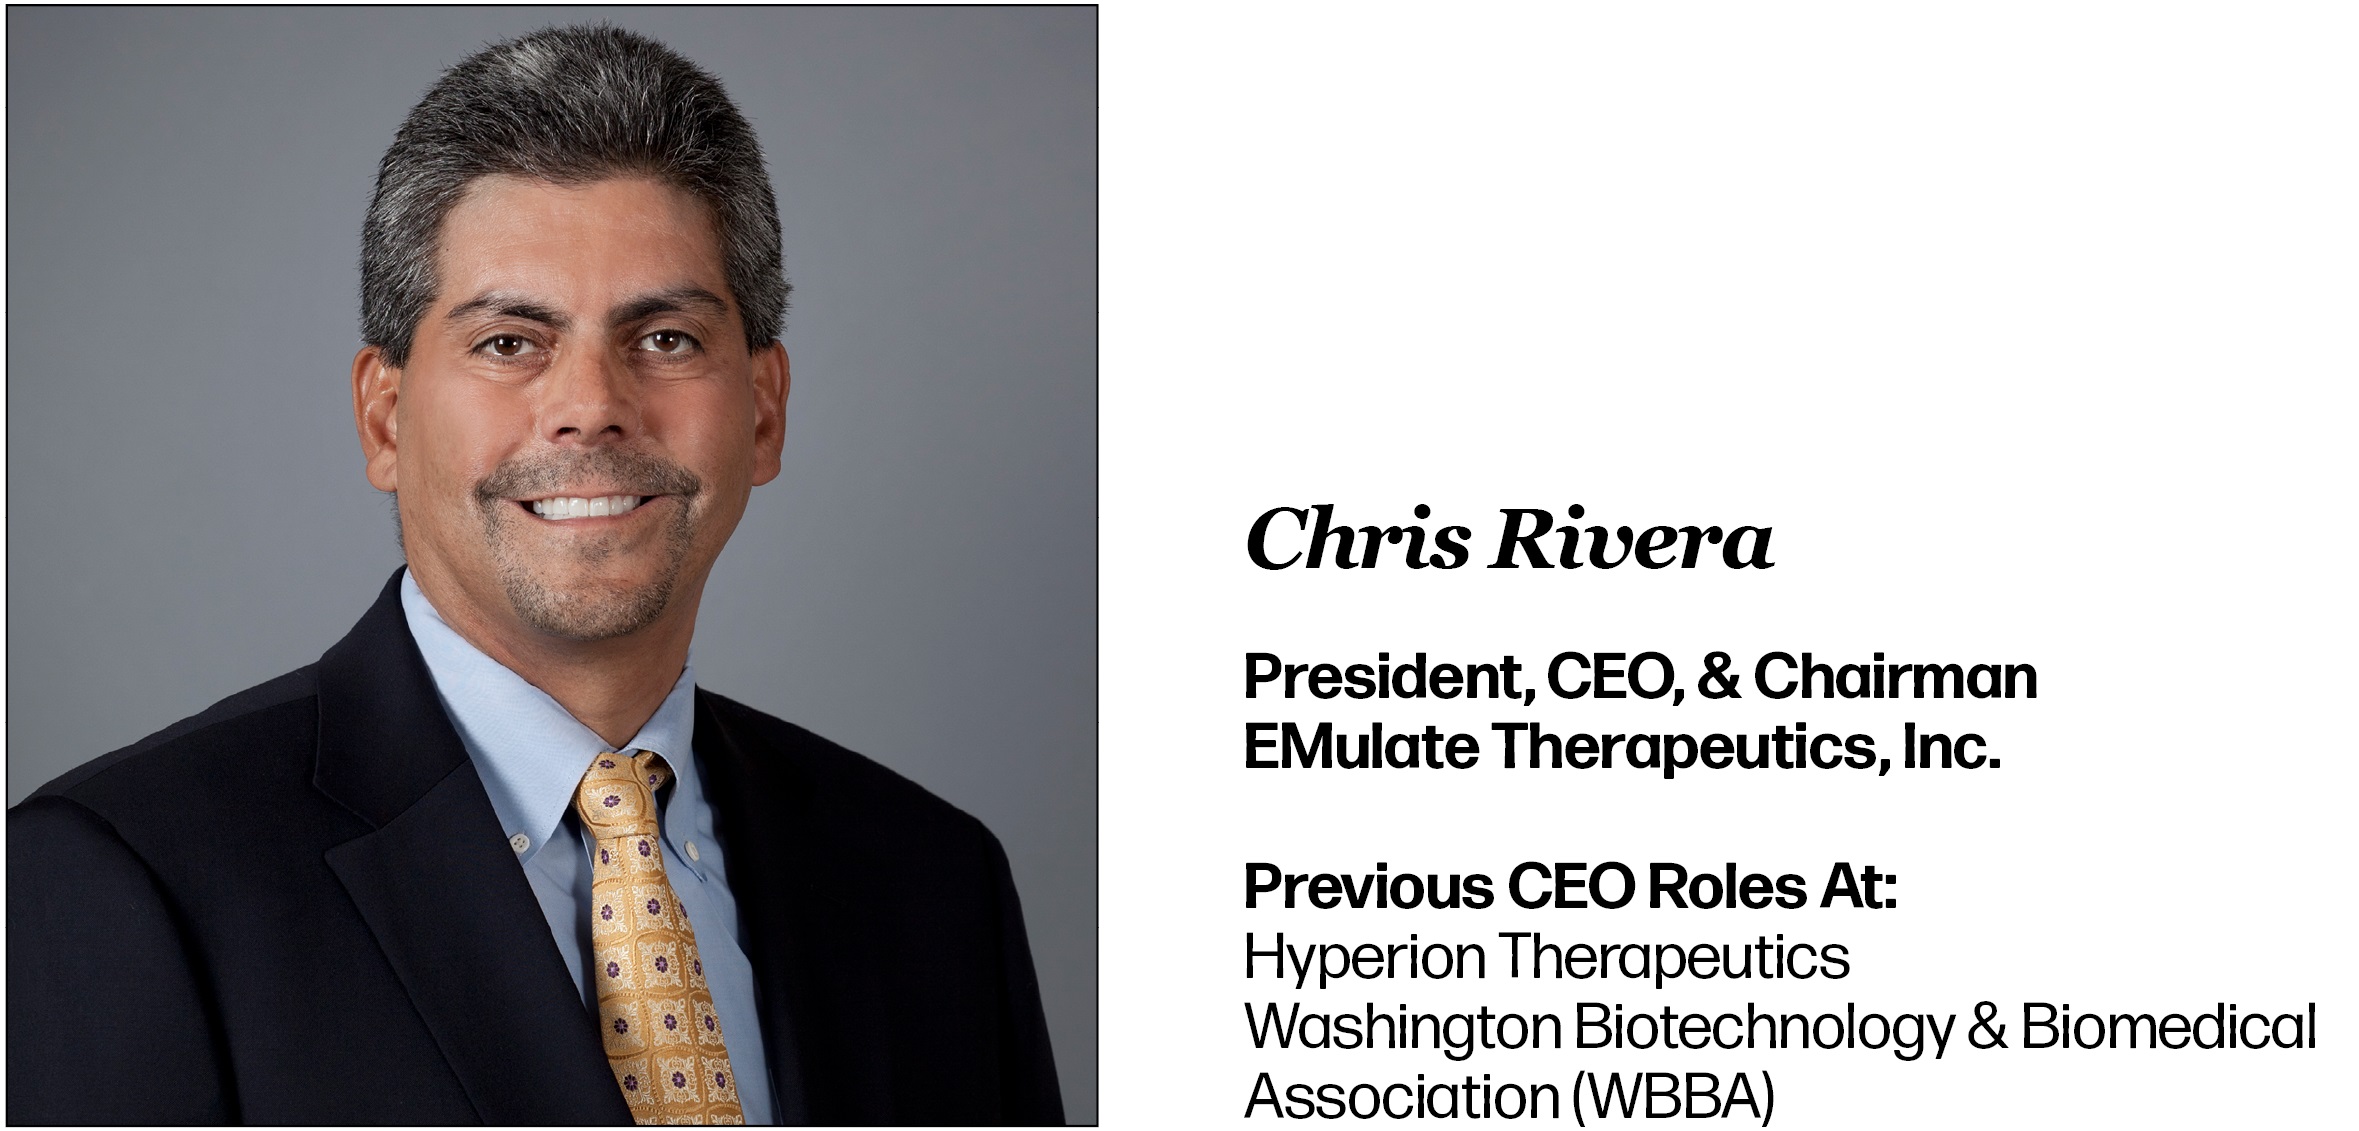 Headshot of Chris Rivera. Lists his current role as President, CEO, & Chairman of EMulate Therapeutics, Inc. His past CEO roles were at Hyperion Therapeutics and Washington Biotechnology & Biomedical Association (WBBA).